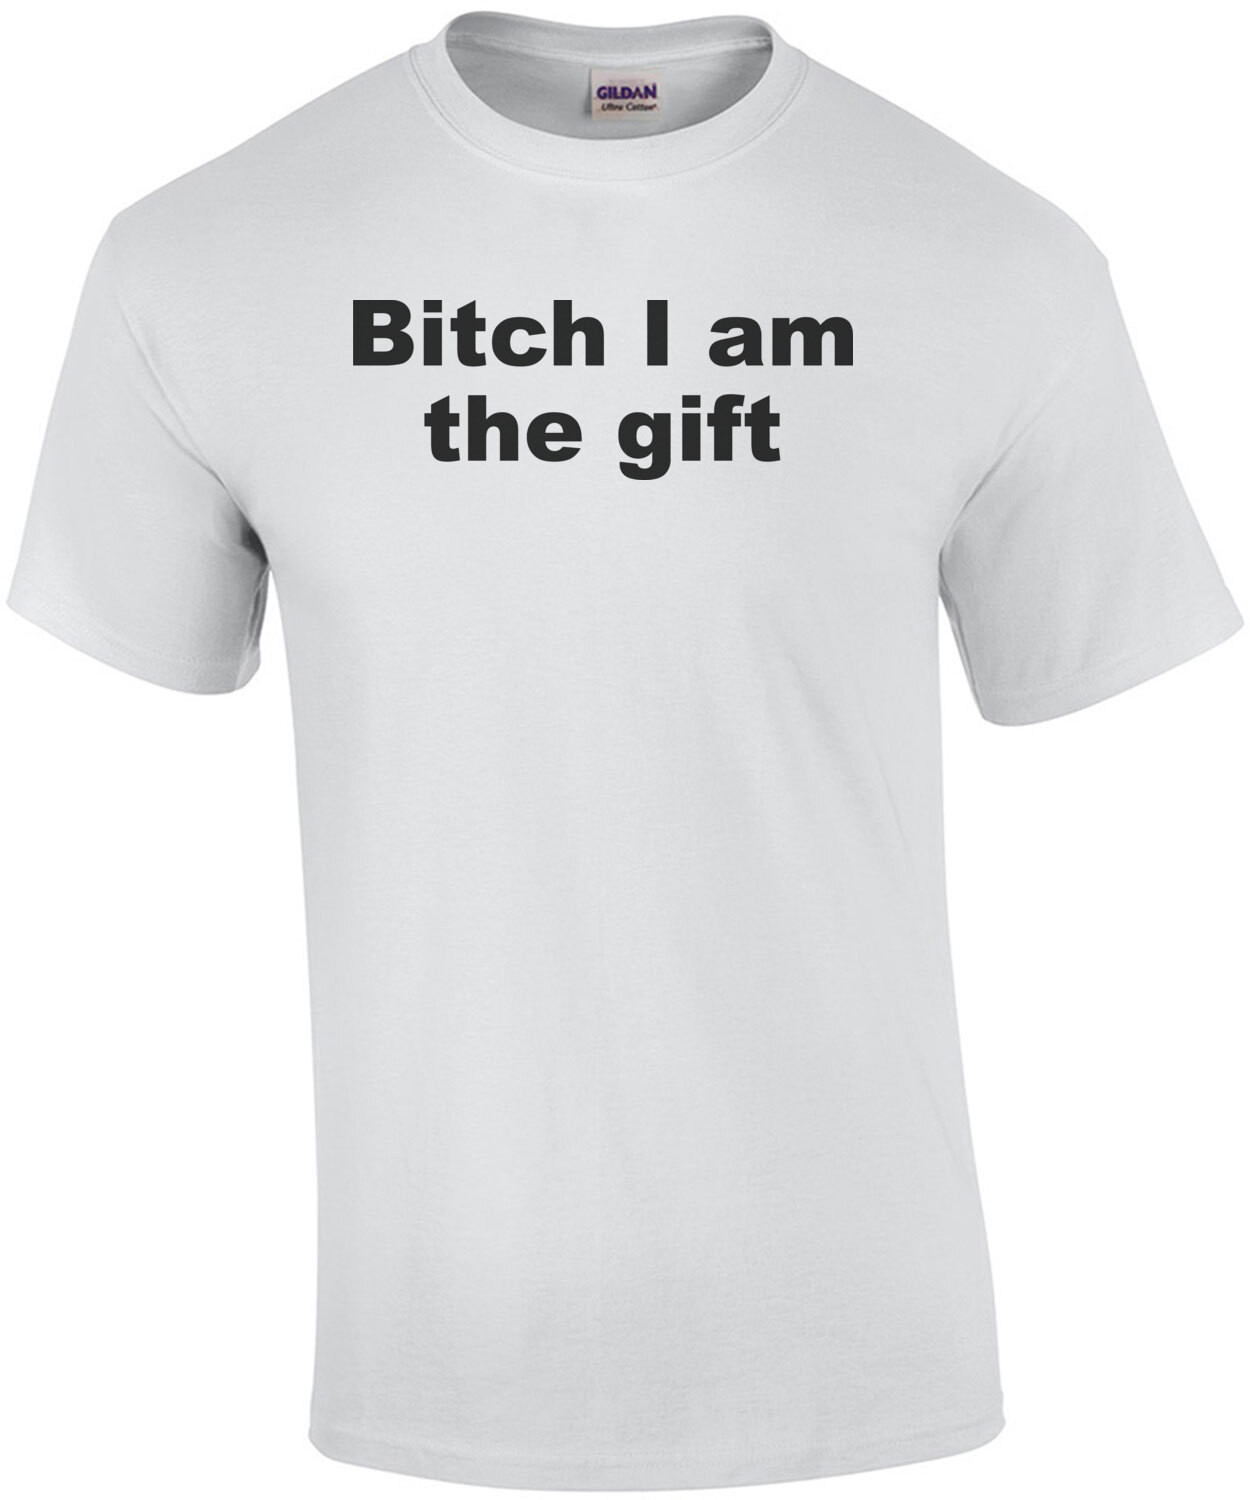 Bitch I am the gift - funny christmas t-shirt